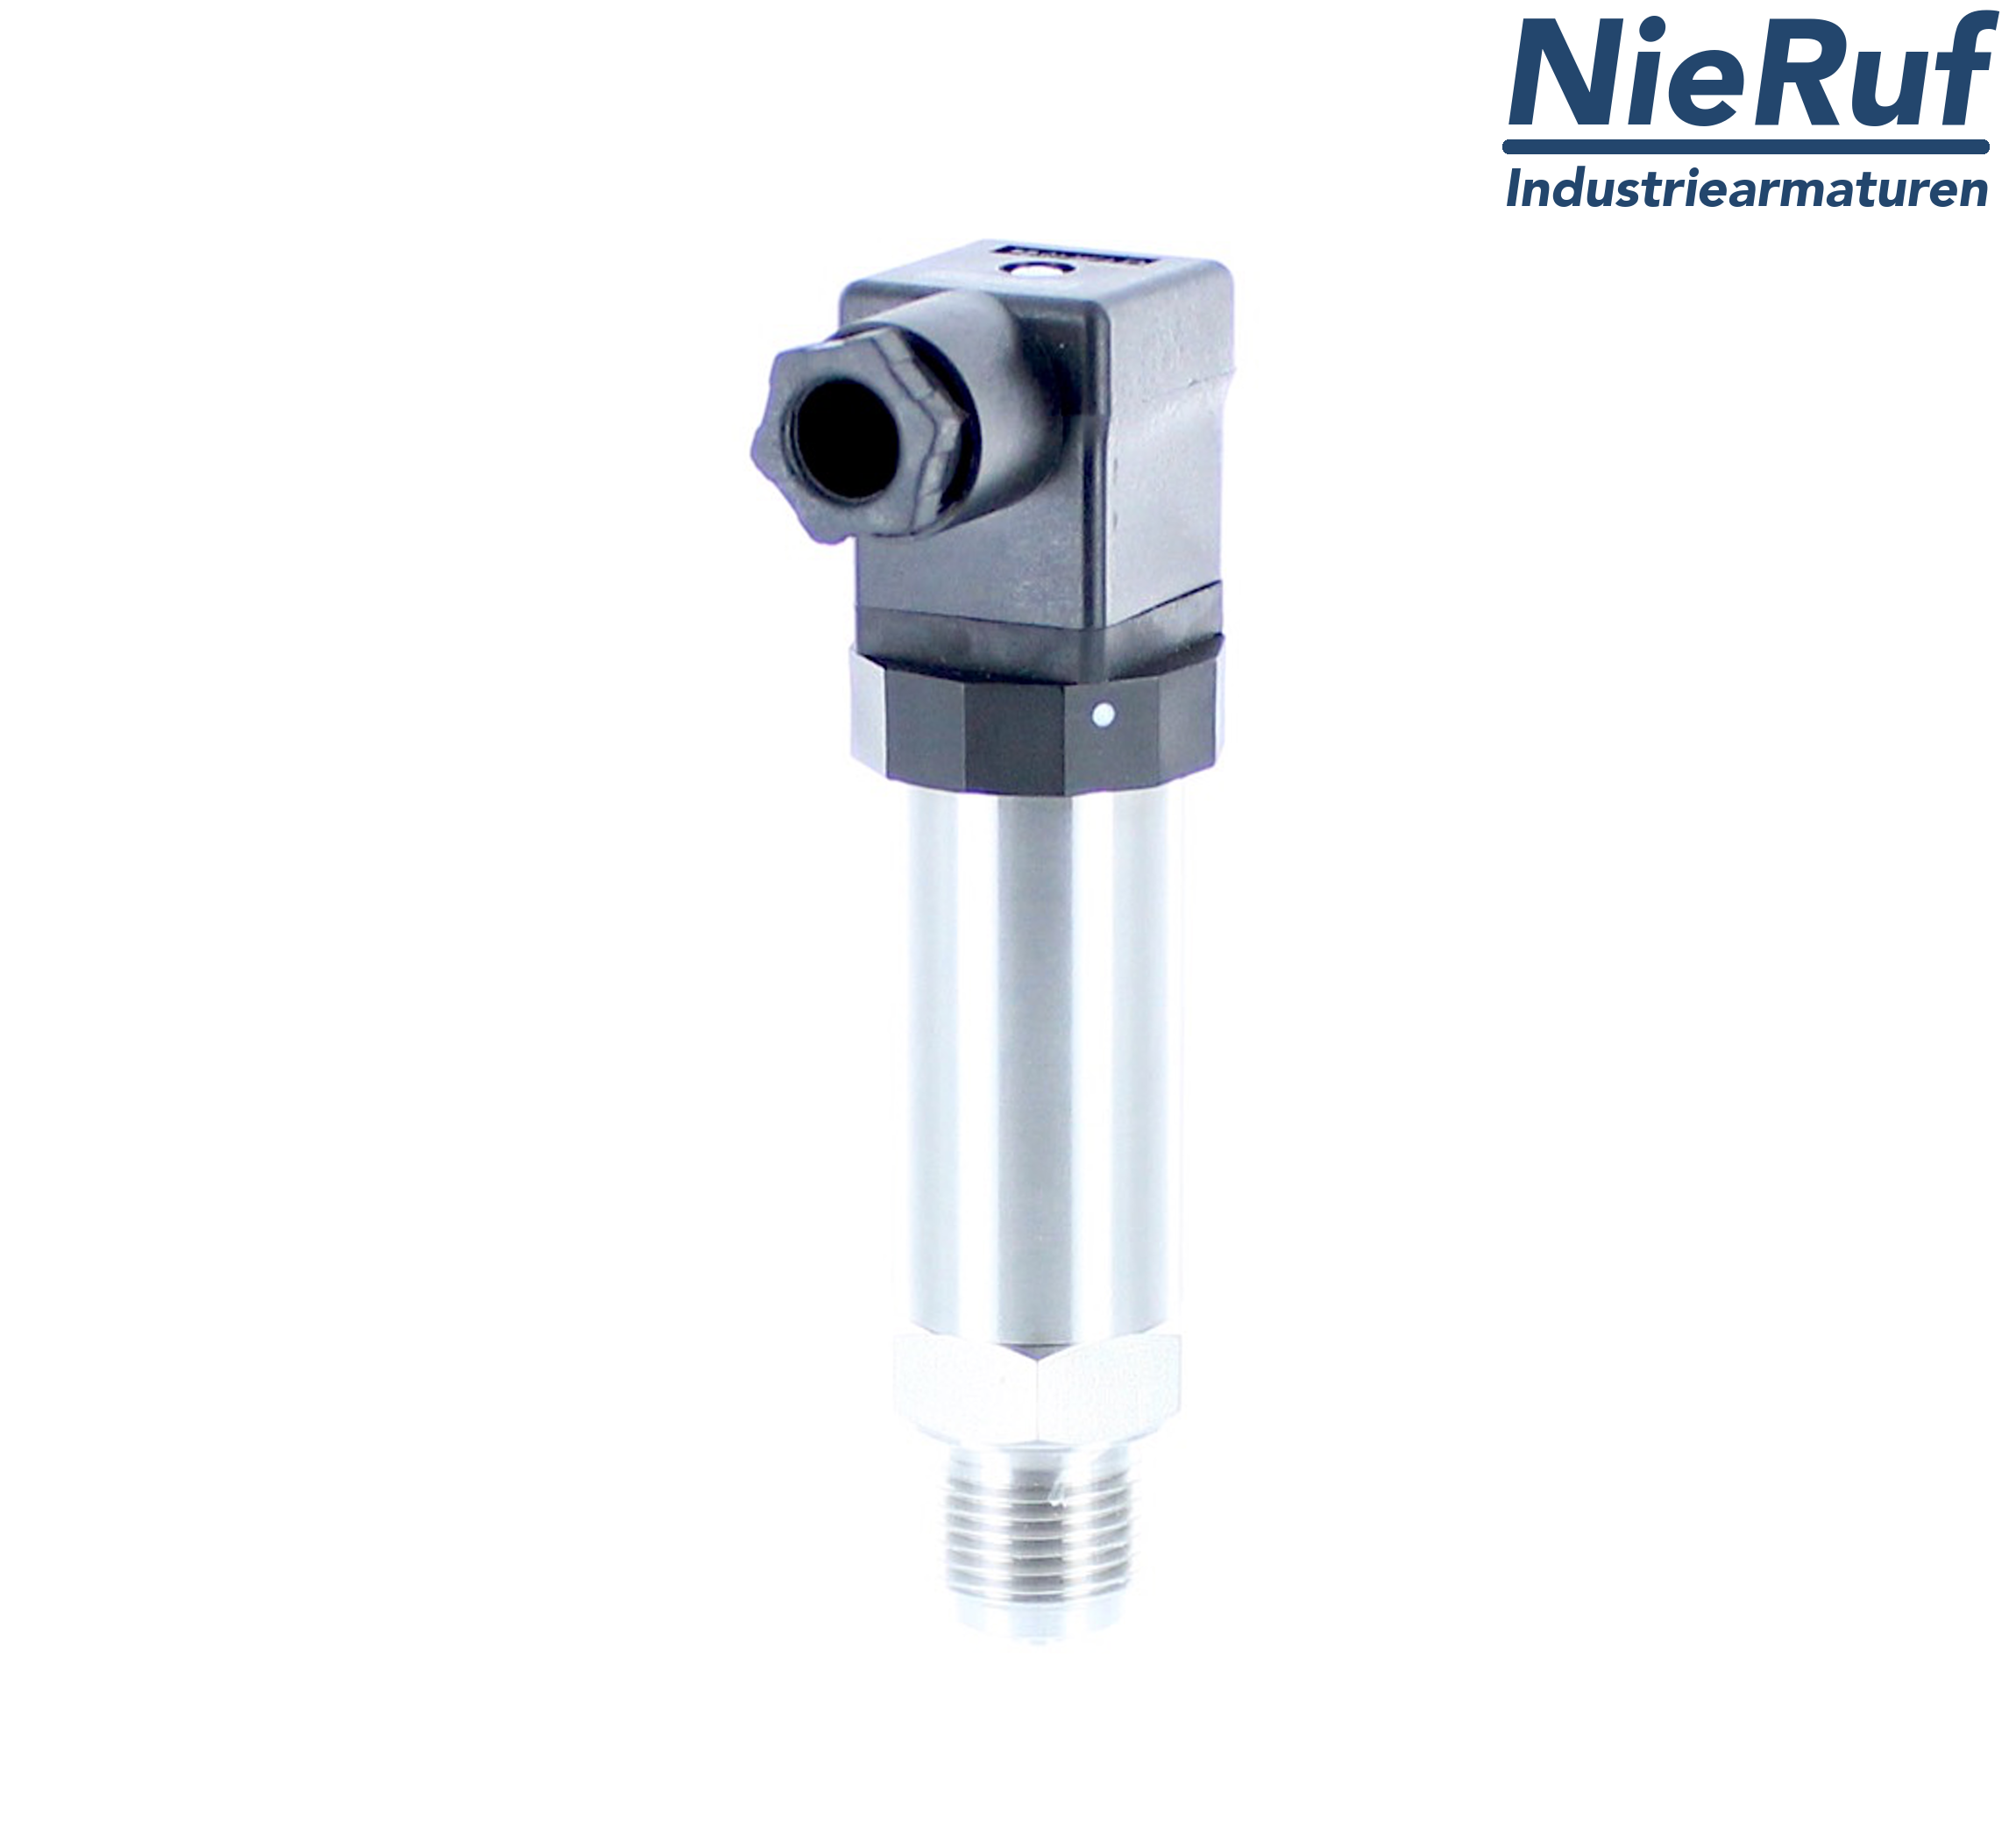 pressure sensor G 1/2" B DS01 stainless steel 2-wire: 4-20mA FPM 0,0 - 40,0 bar